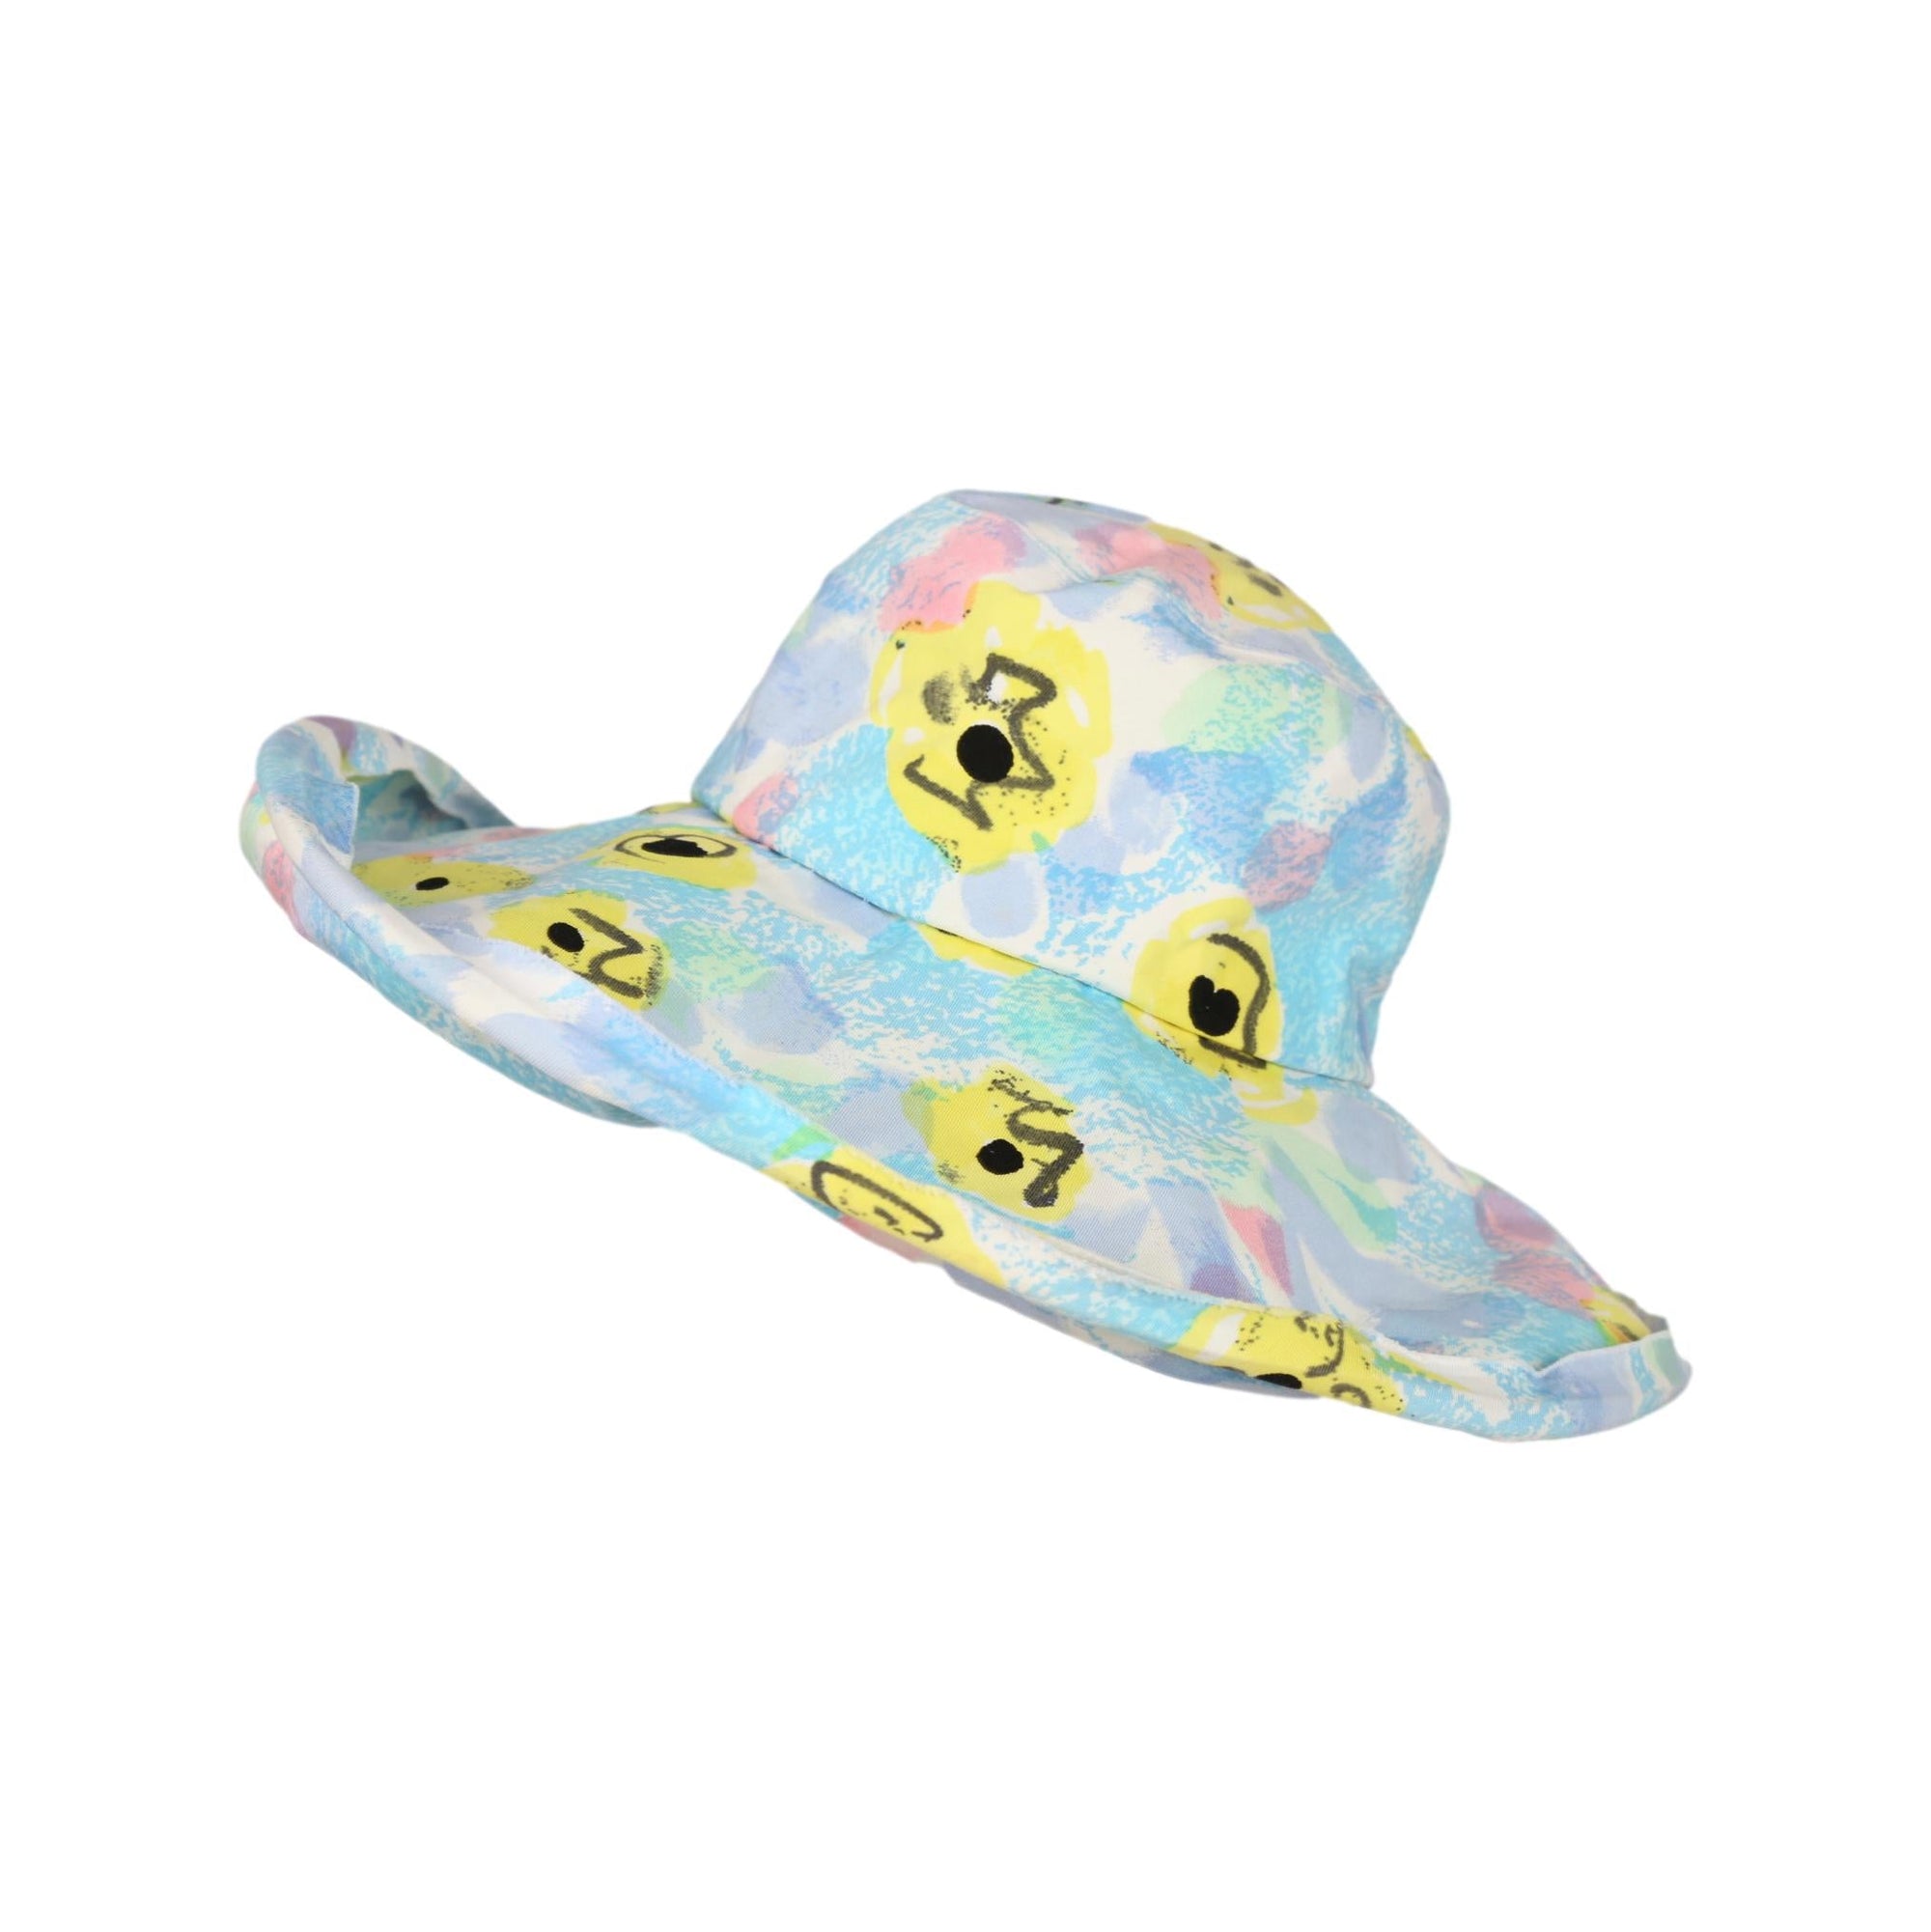 Chanel Blue Floral Jumbo Sun Hat - Accessories